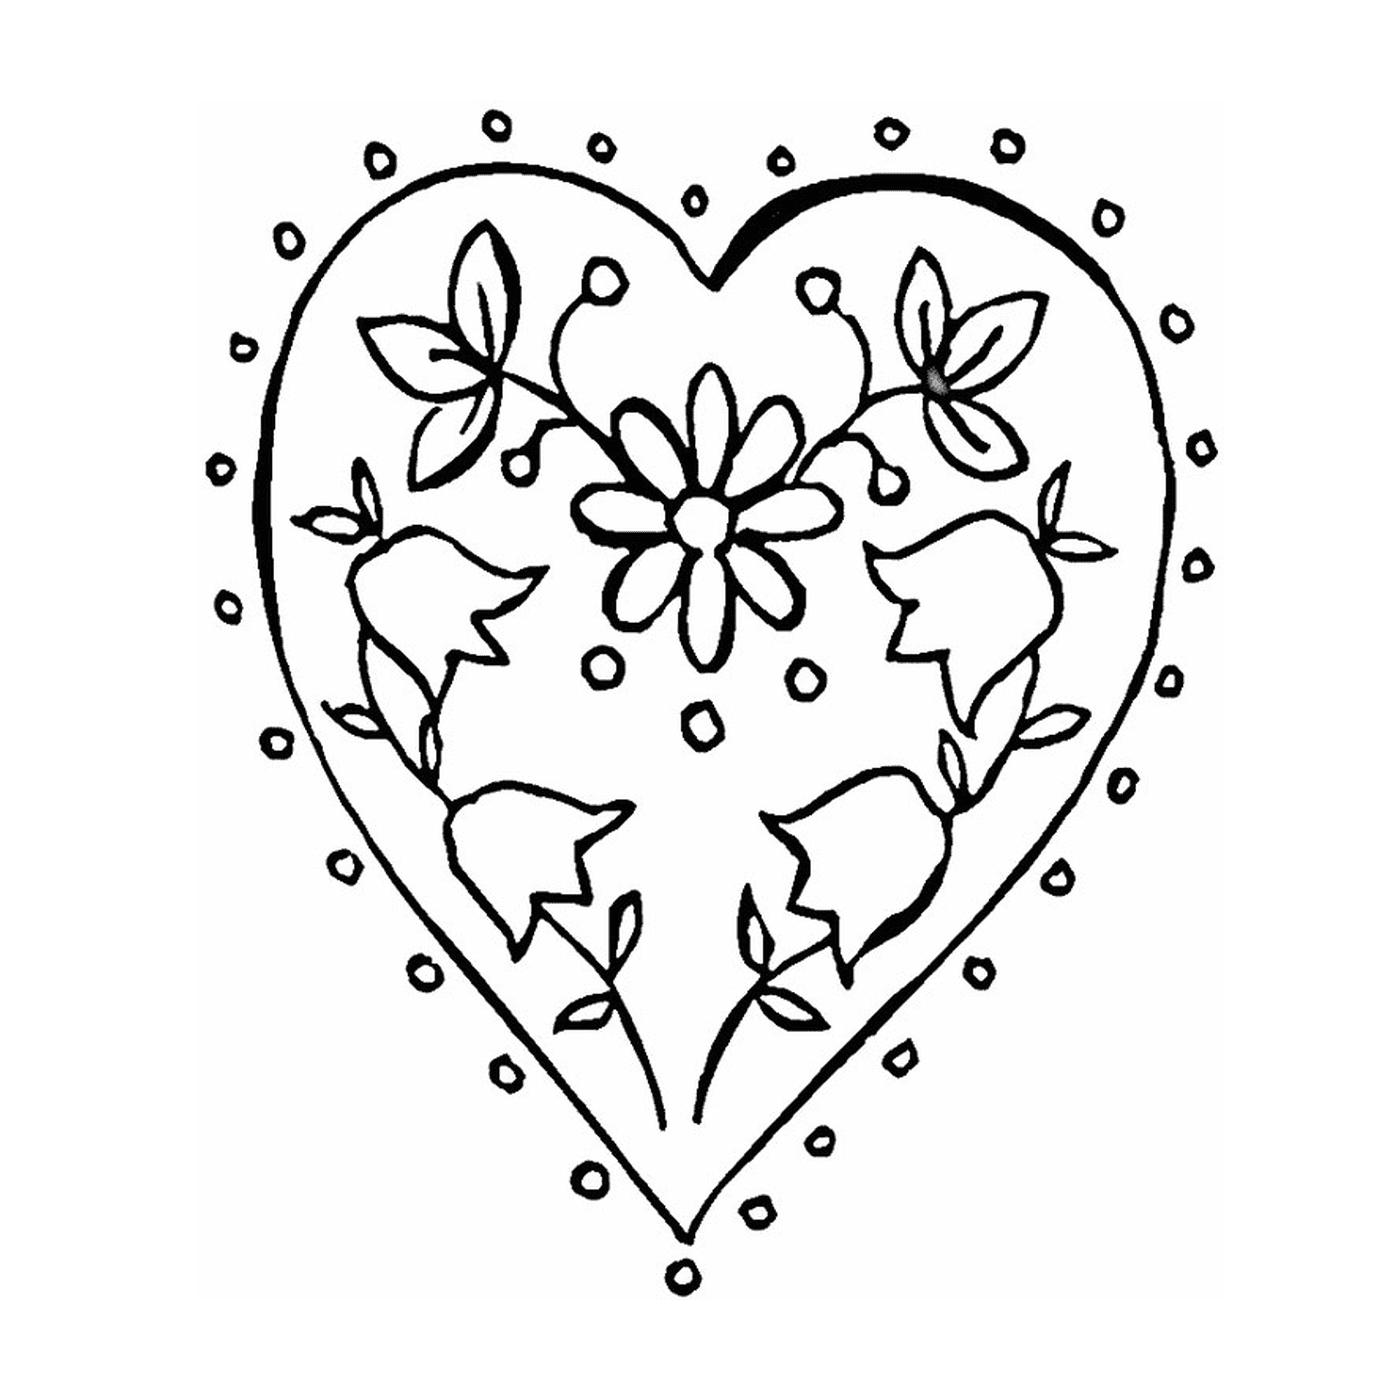  A heart with flowers 